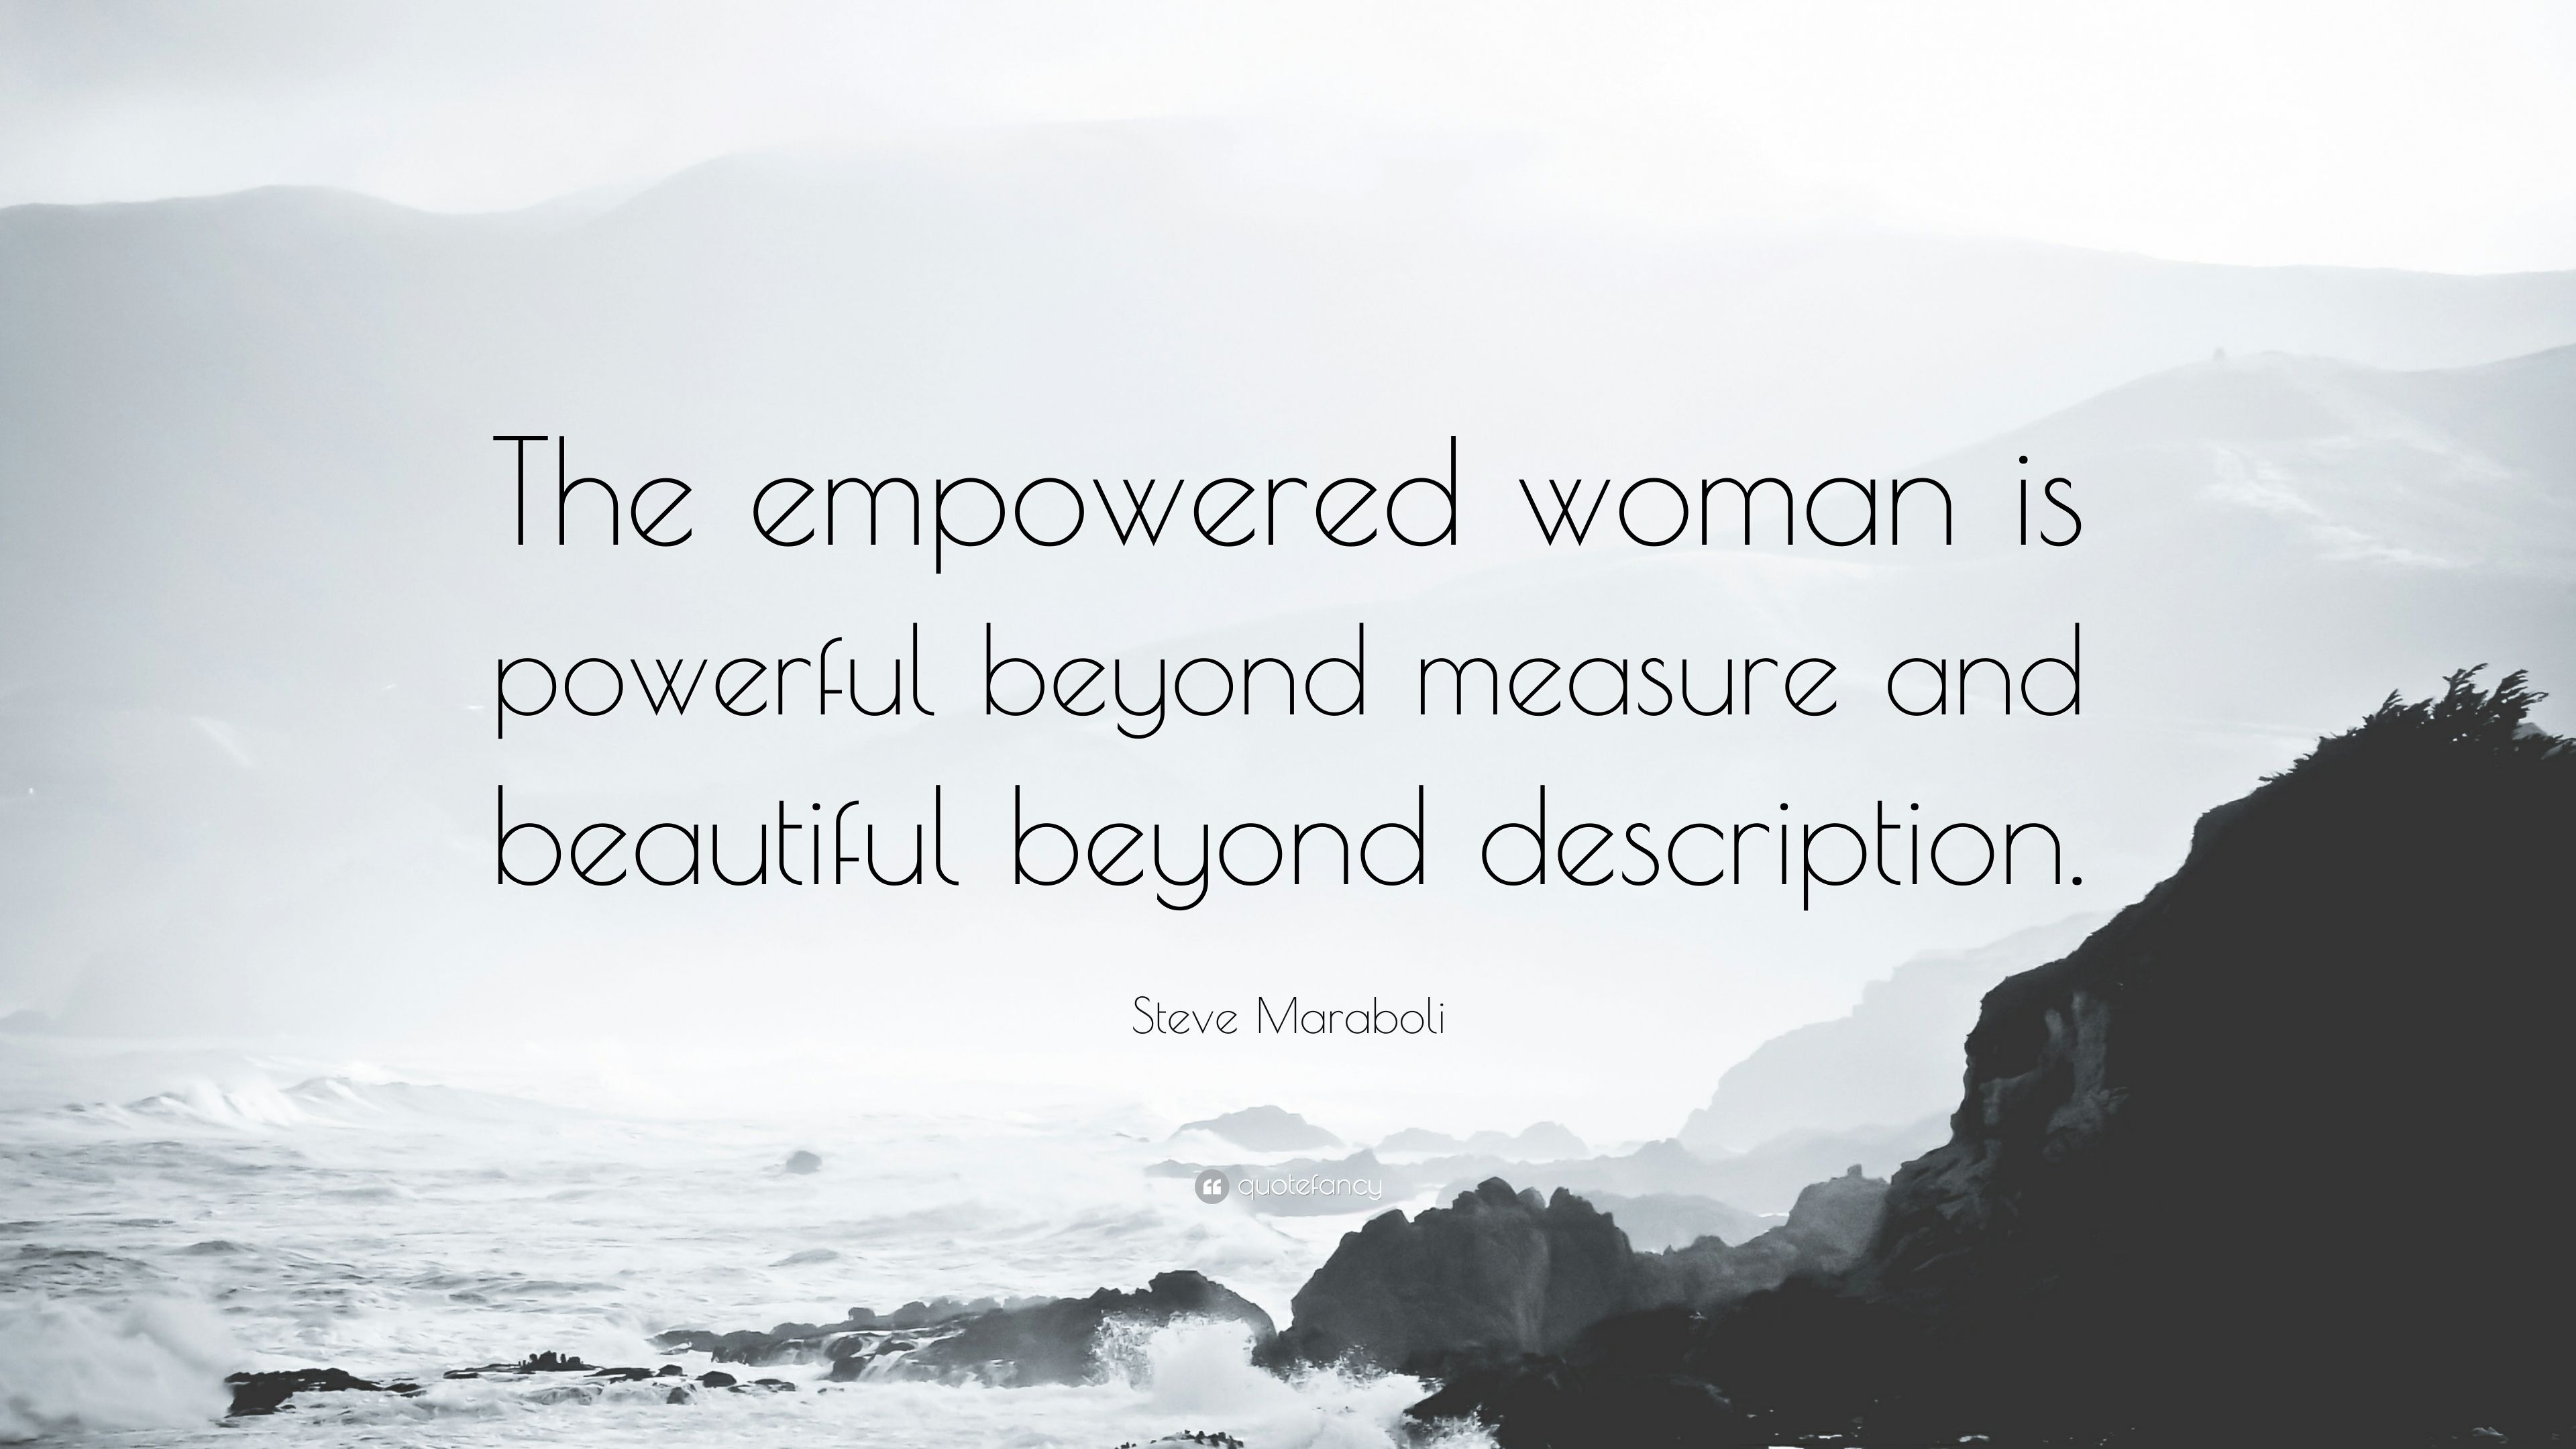 Steve Maraboli Quote: “The empowered woman is powerful beyond measure and beautiful beyond description.”